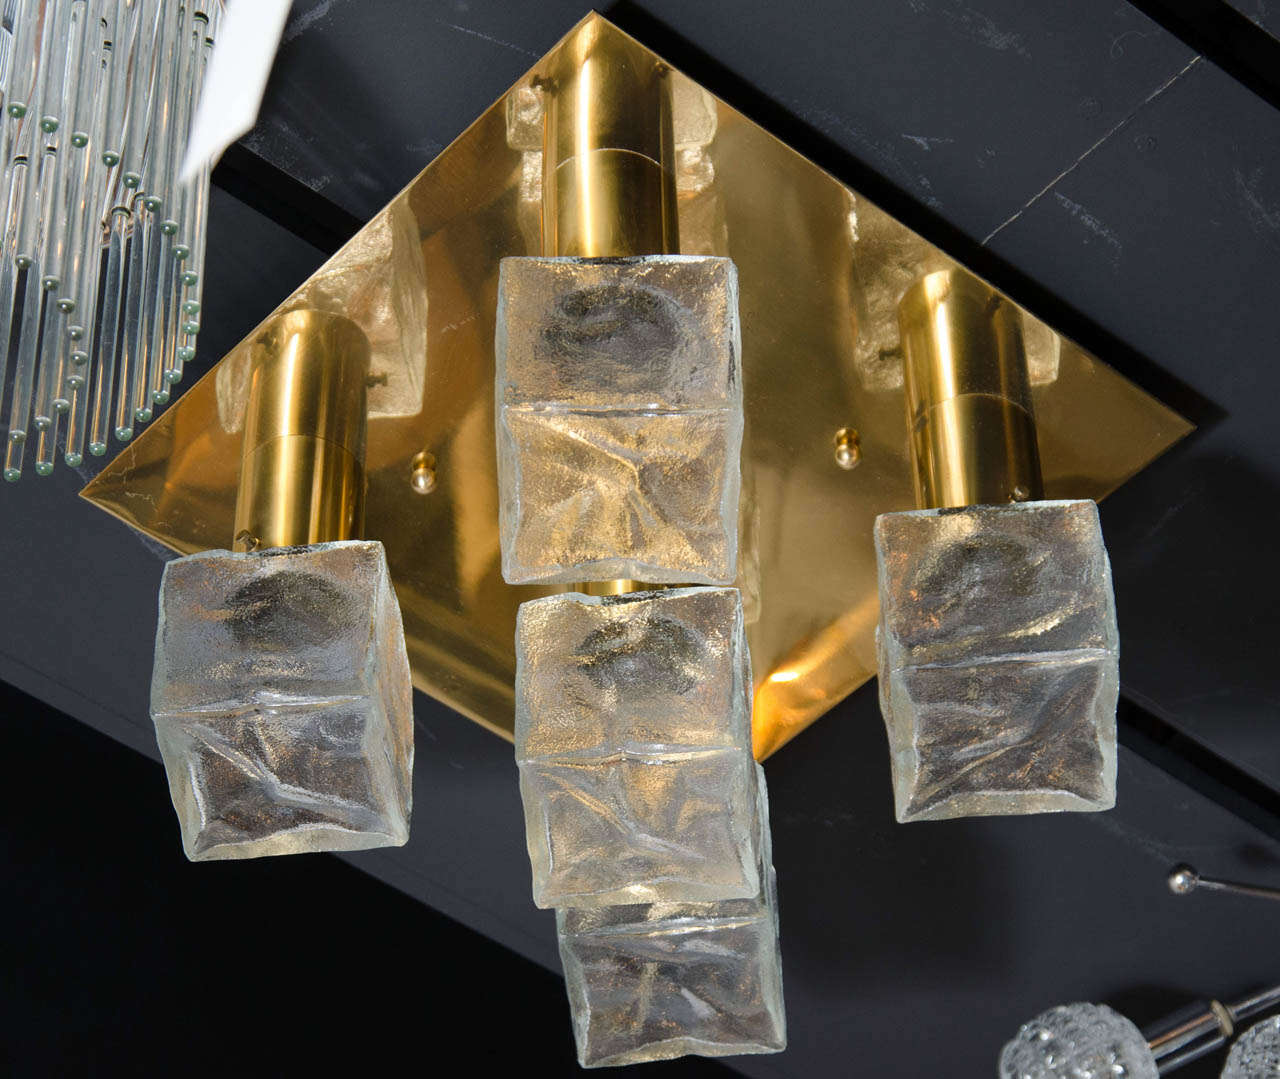 This brilliant midcentury flush mount chandelier was realized by the esteemed Austrian producer J.T. Kalmar, circa 1960. It features a square polished brass frame with five cylindrical arms in the same material that connect to handblown Murano